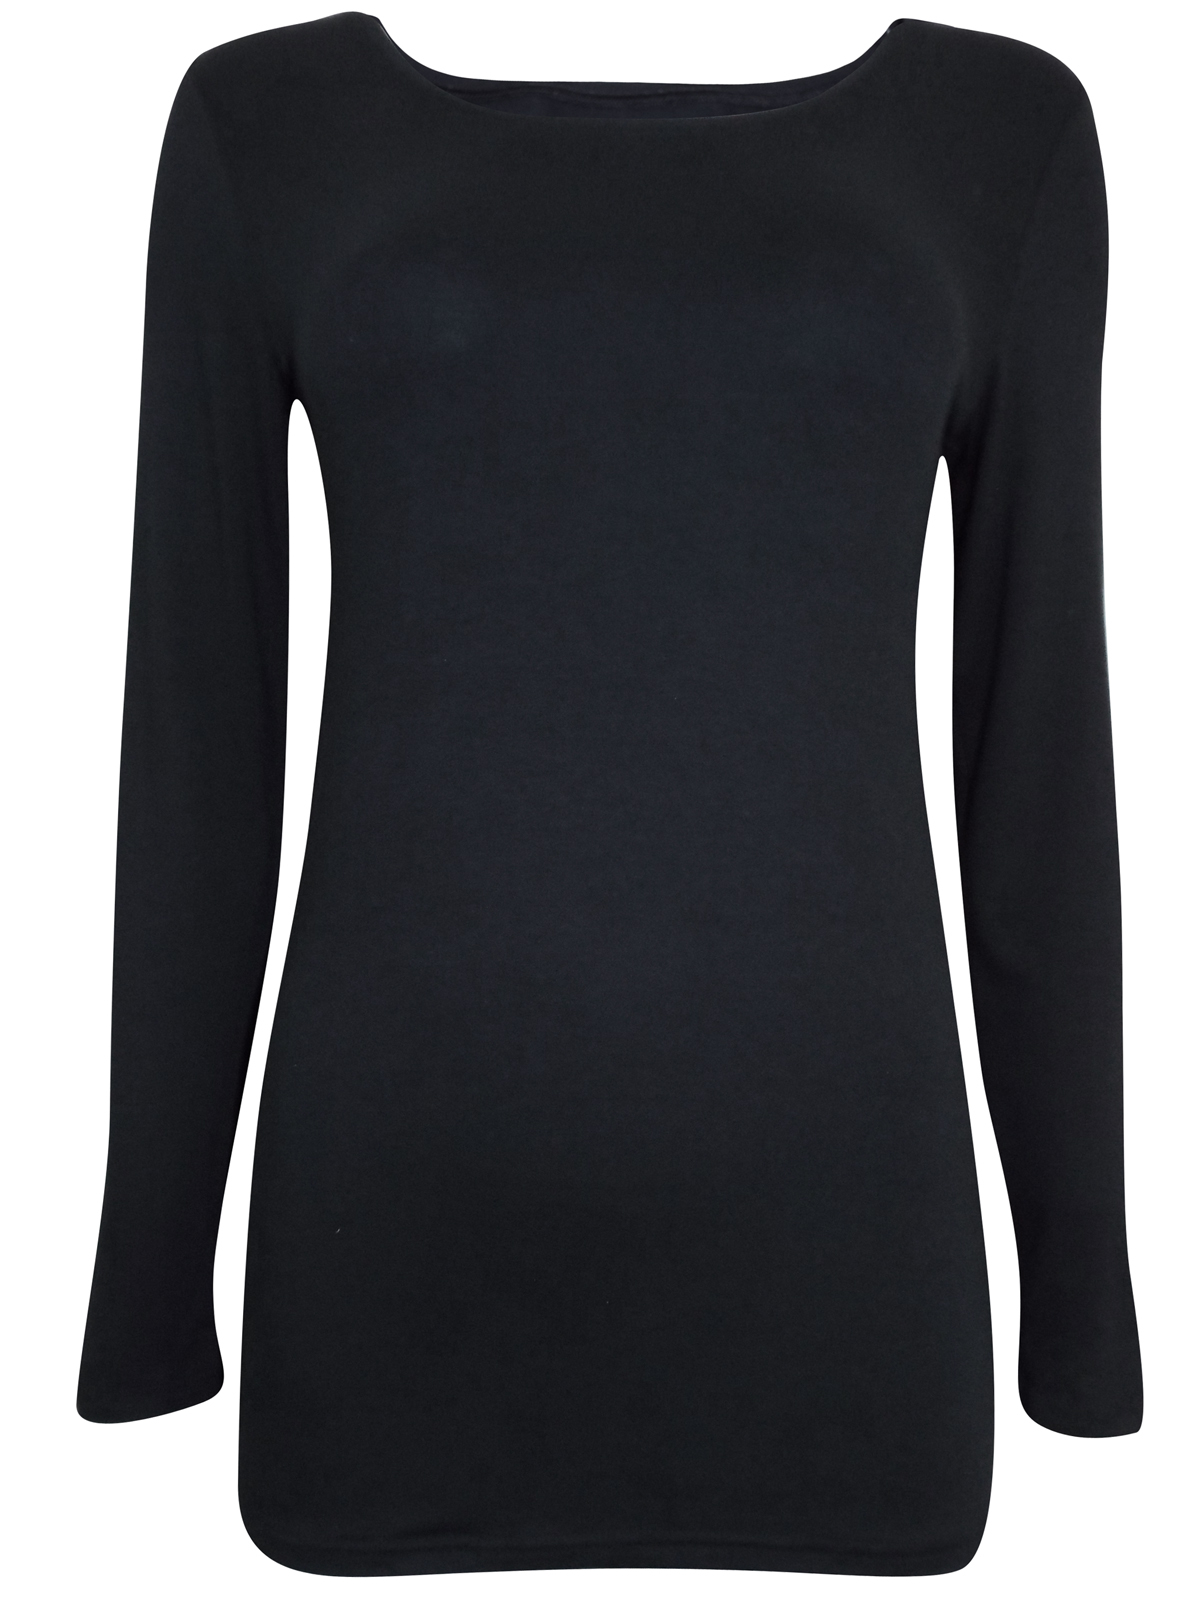 Starlet - - Starlet BLACK Long Sleeve Jersey Top - Size 8 to 18